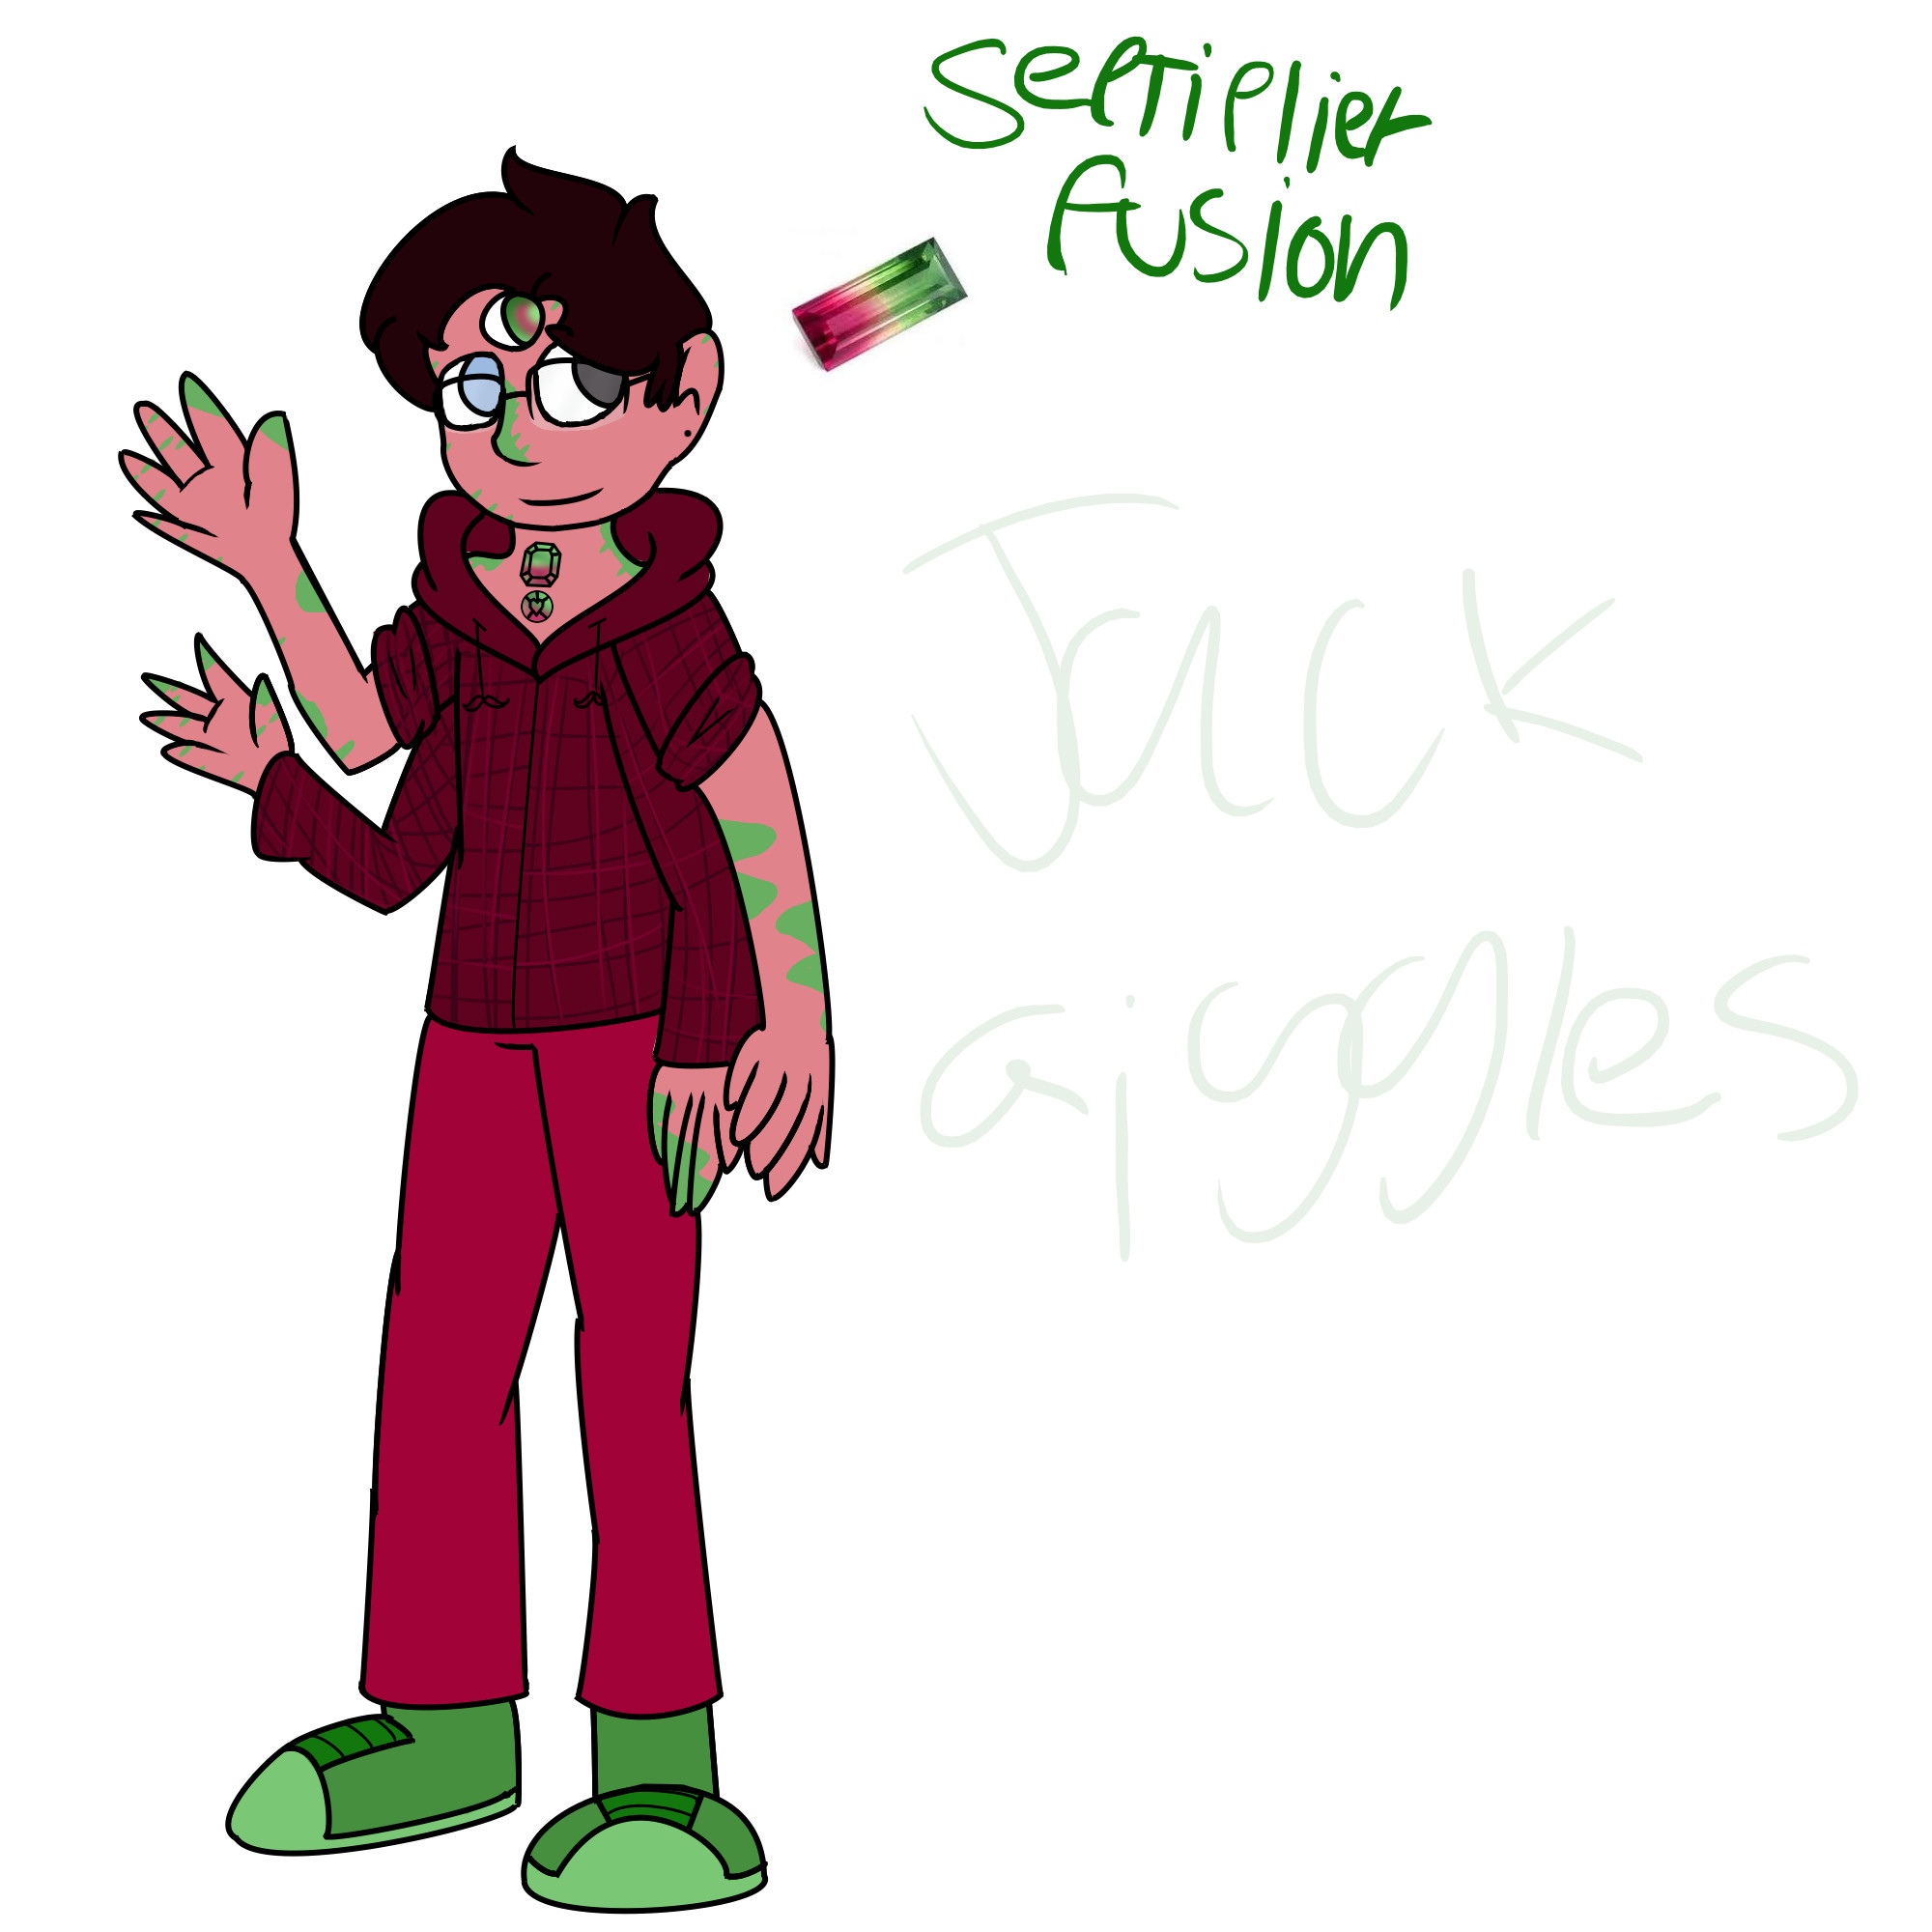 2000x2000 Septiplier fusion by JackGiggles Septiplier fusion by JackGiggles